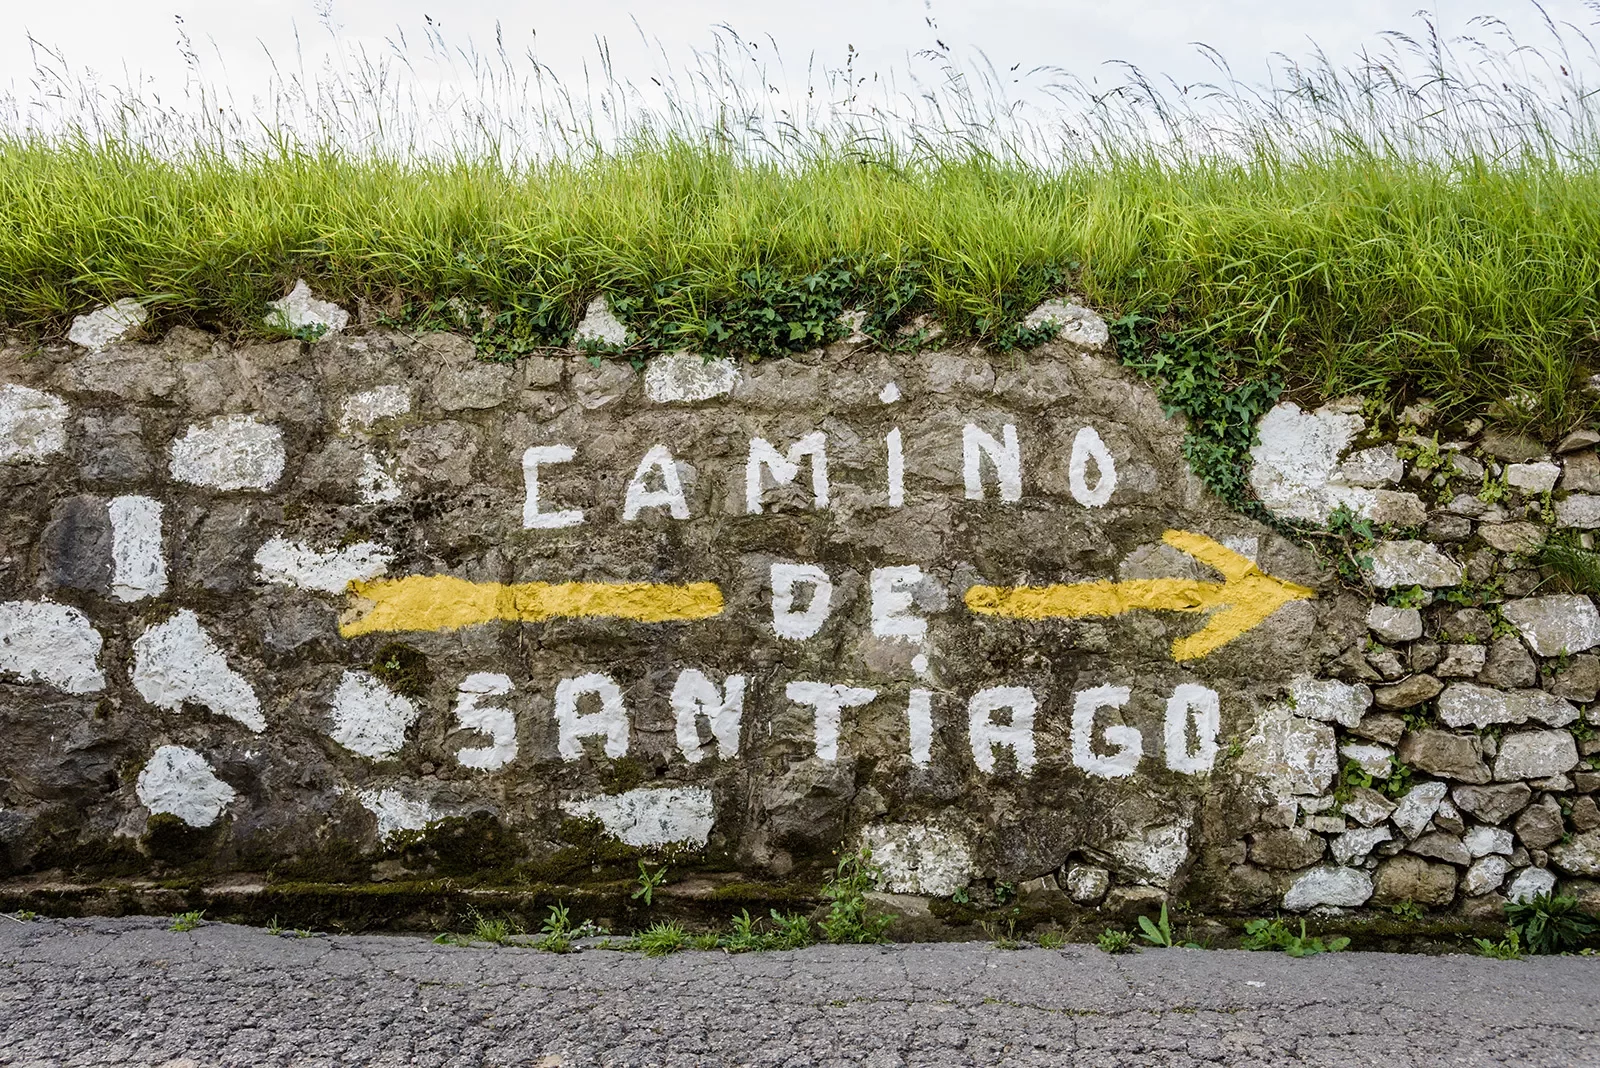 Shot of stone wall with &quot;Camino de Santiago&quot; painted on it.